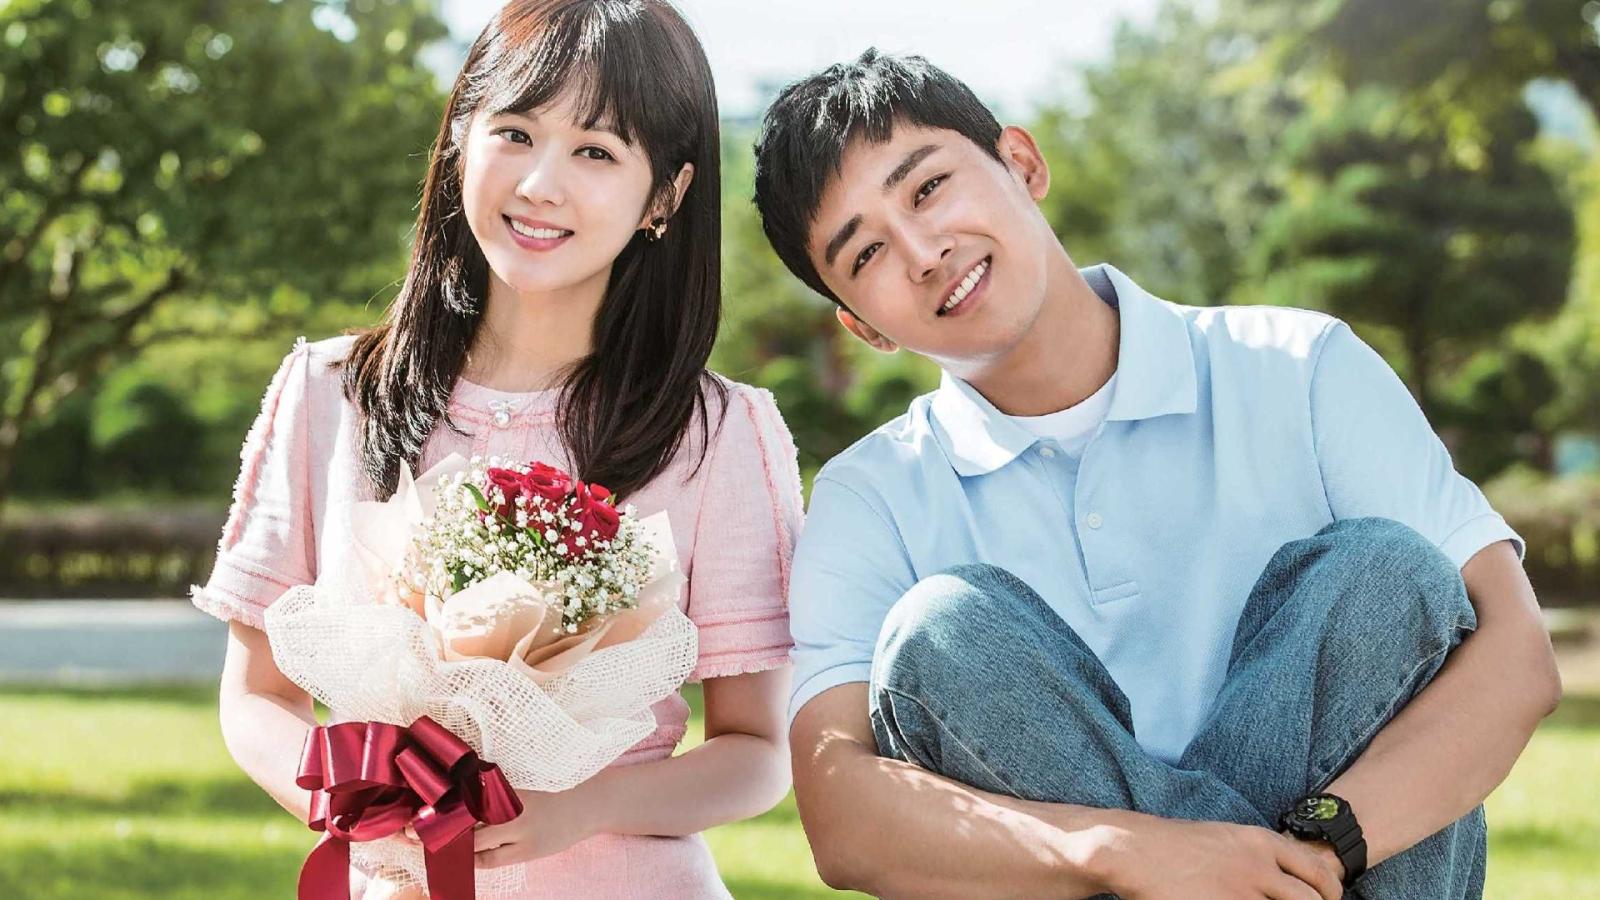 Simple Yet Wholesome: 10 More K-Dramas Like Reply 1988 - image 10